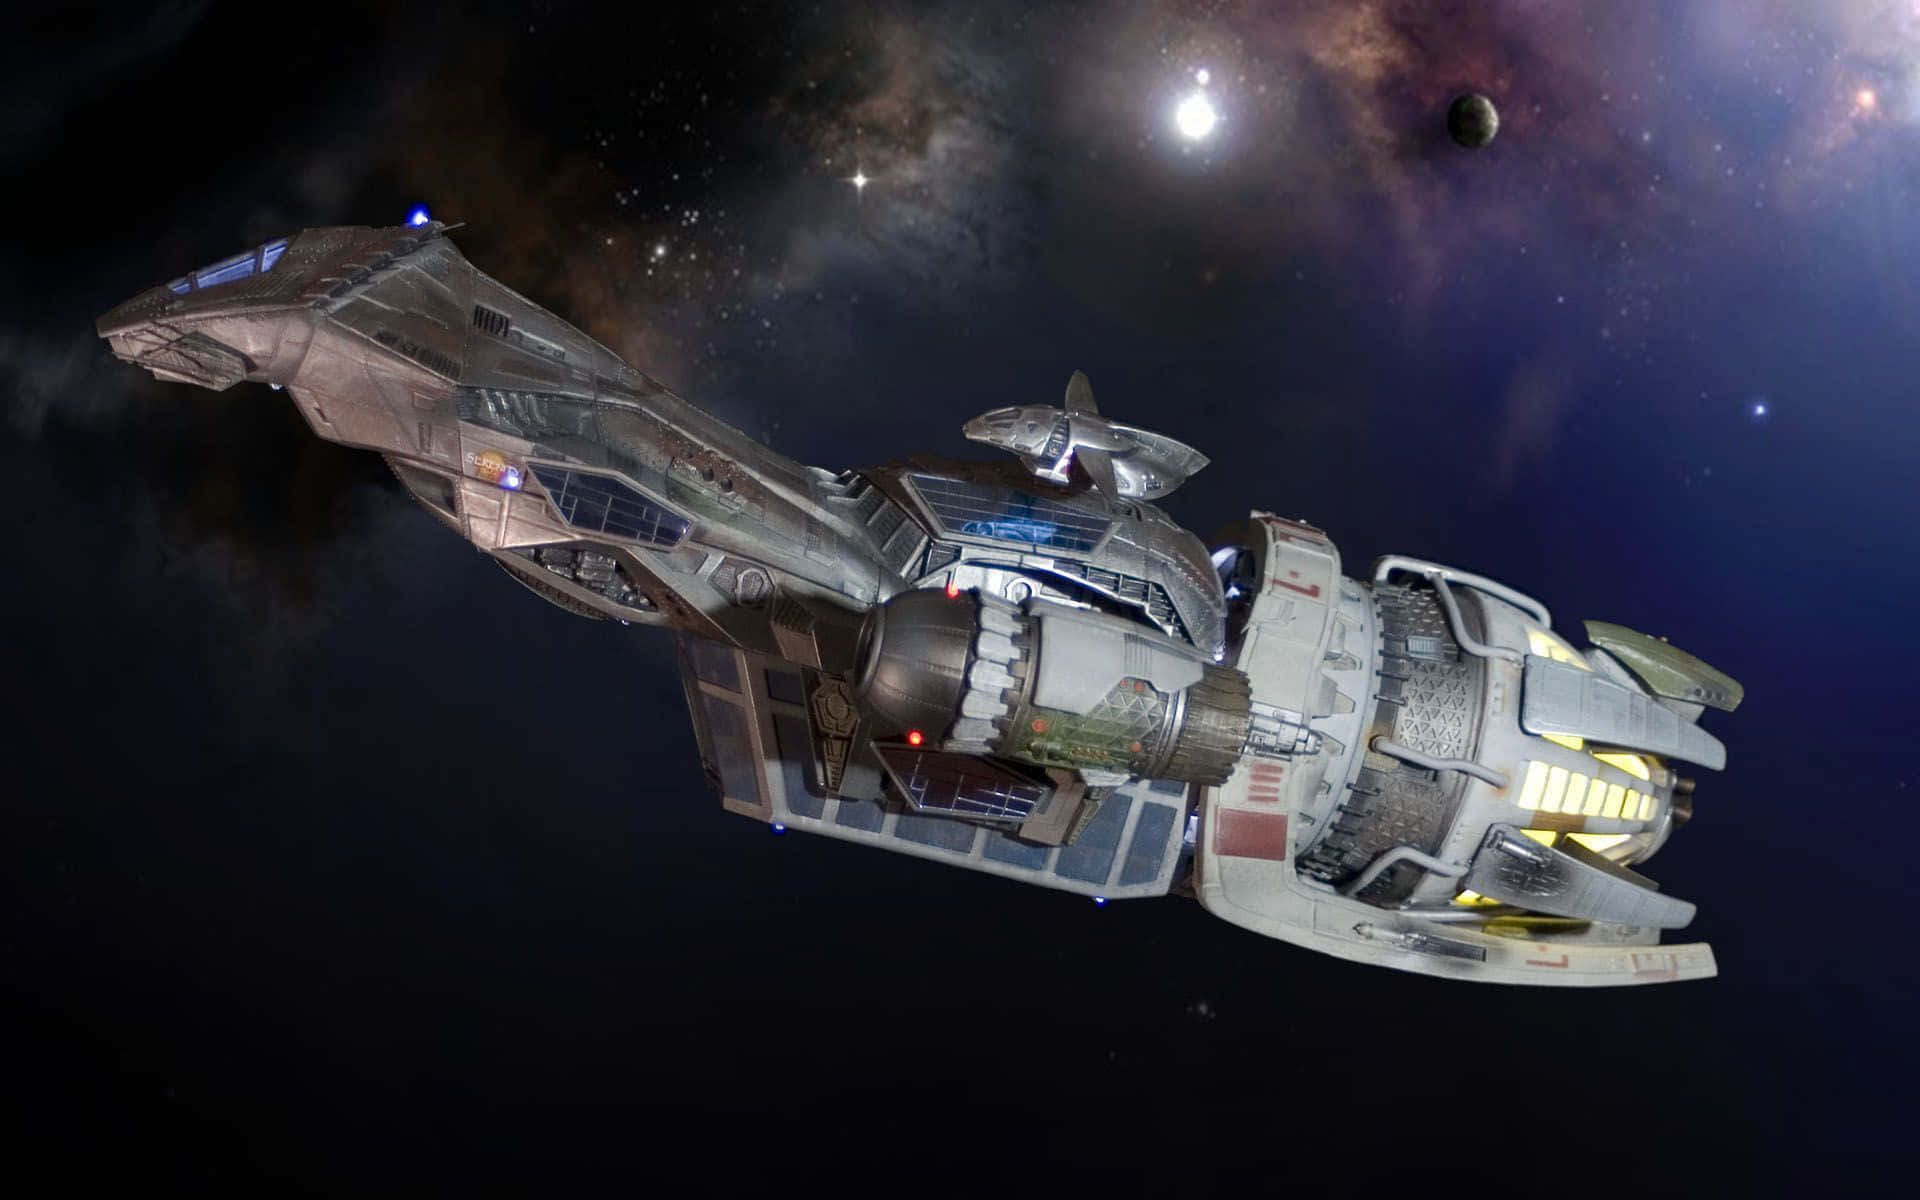 Join the intergalactic adventures of the spaceship Serenity Wallpaper